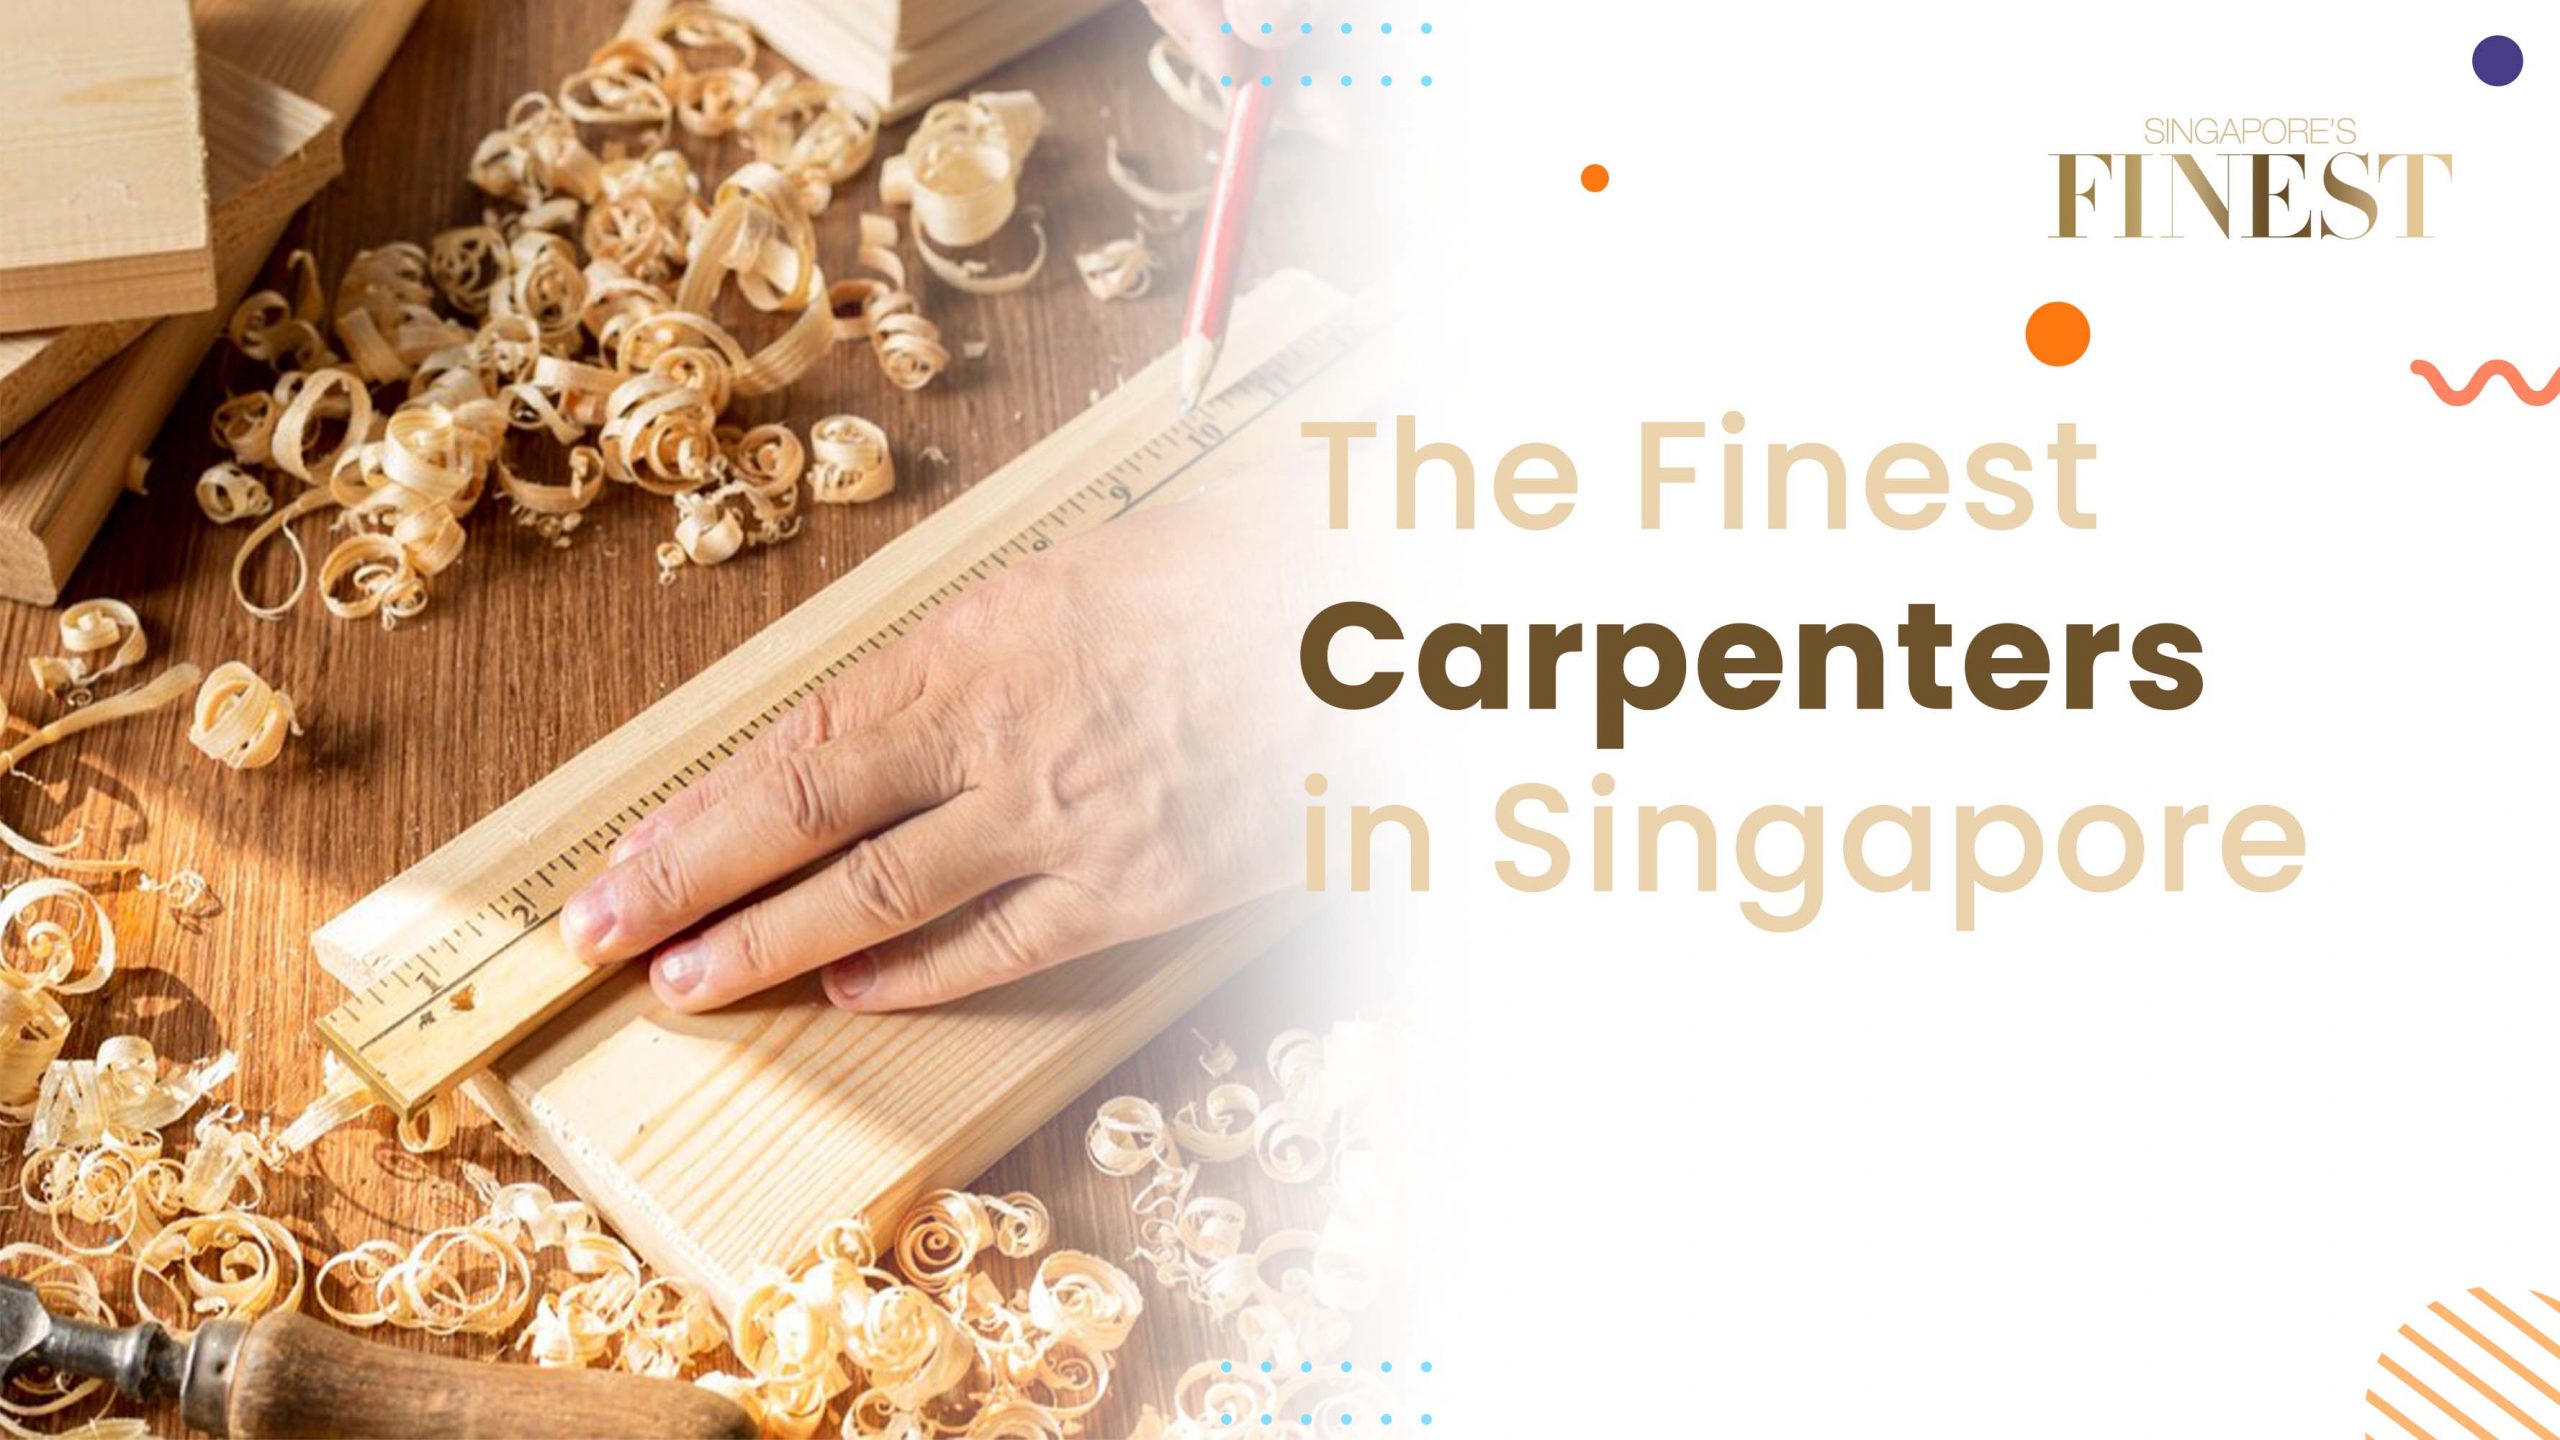 The Finest Carpenters in Singapore